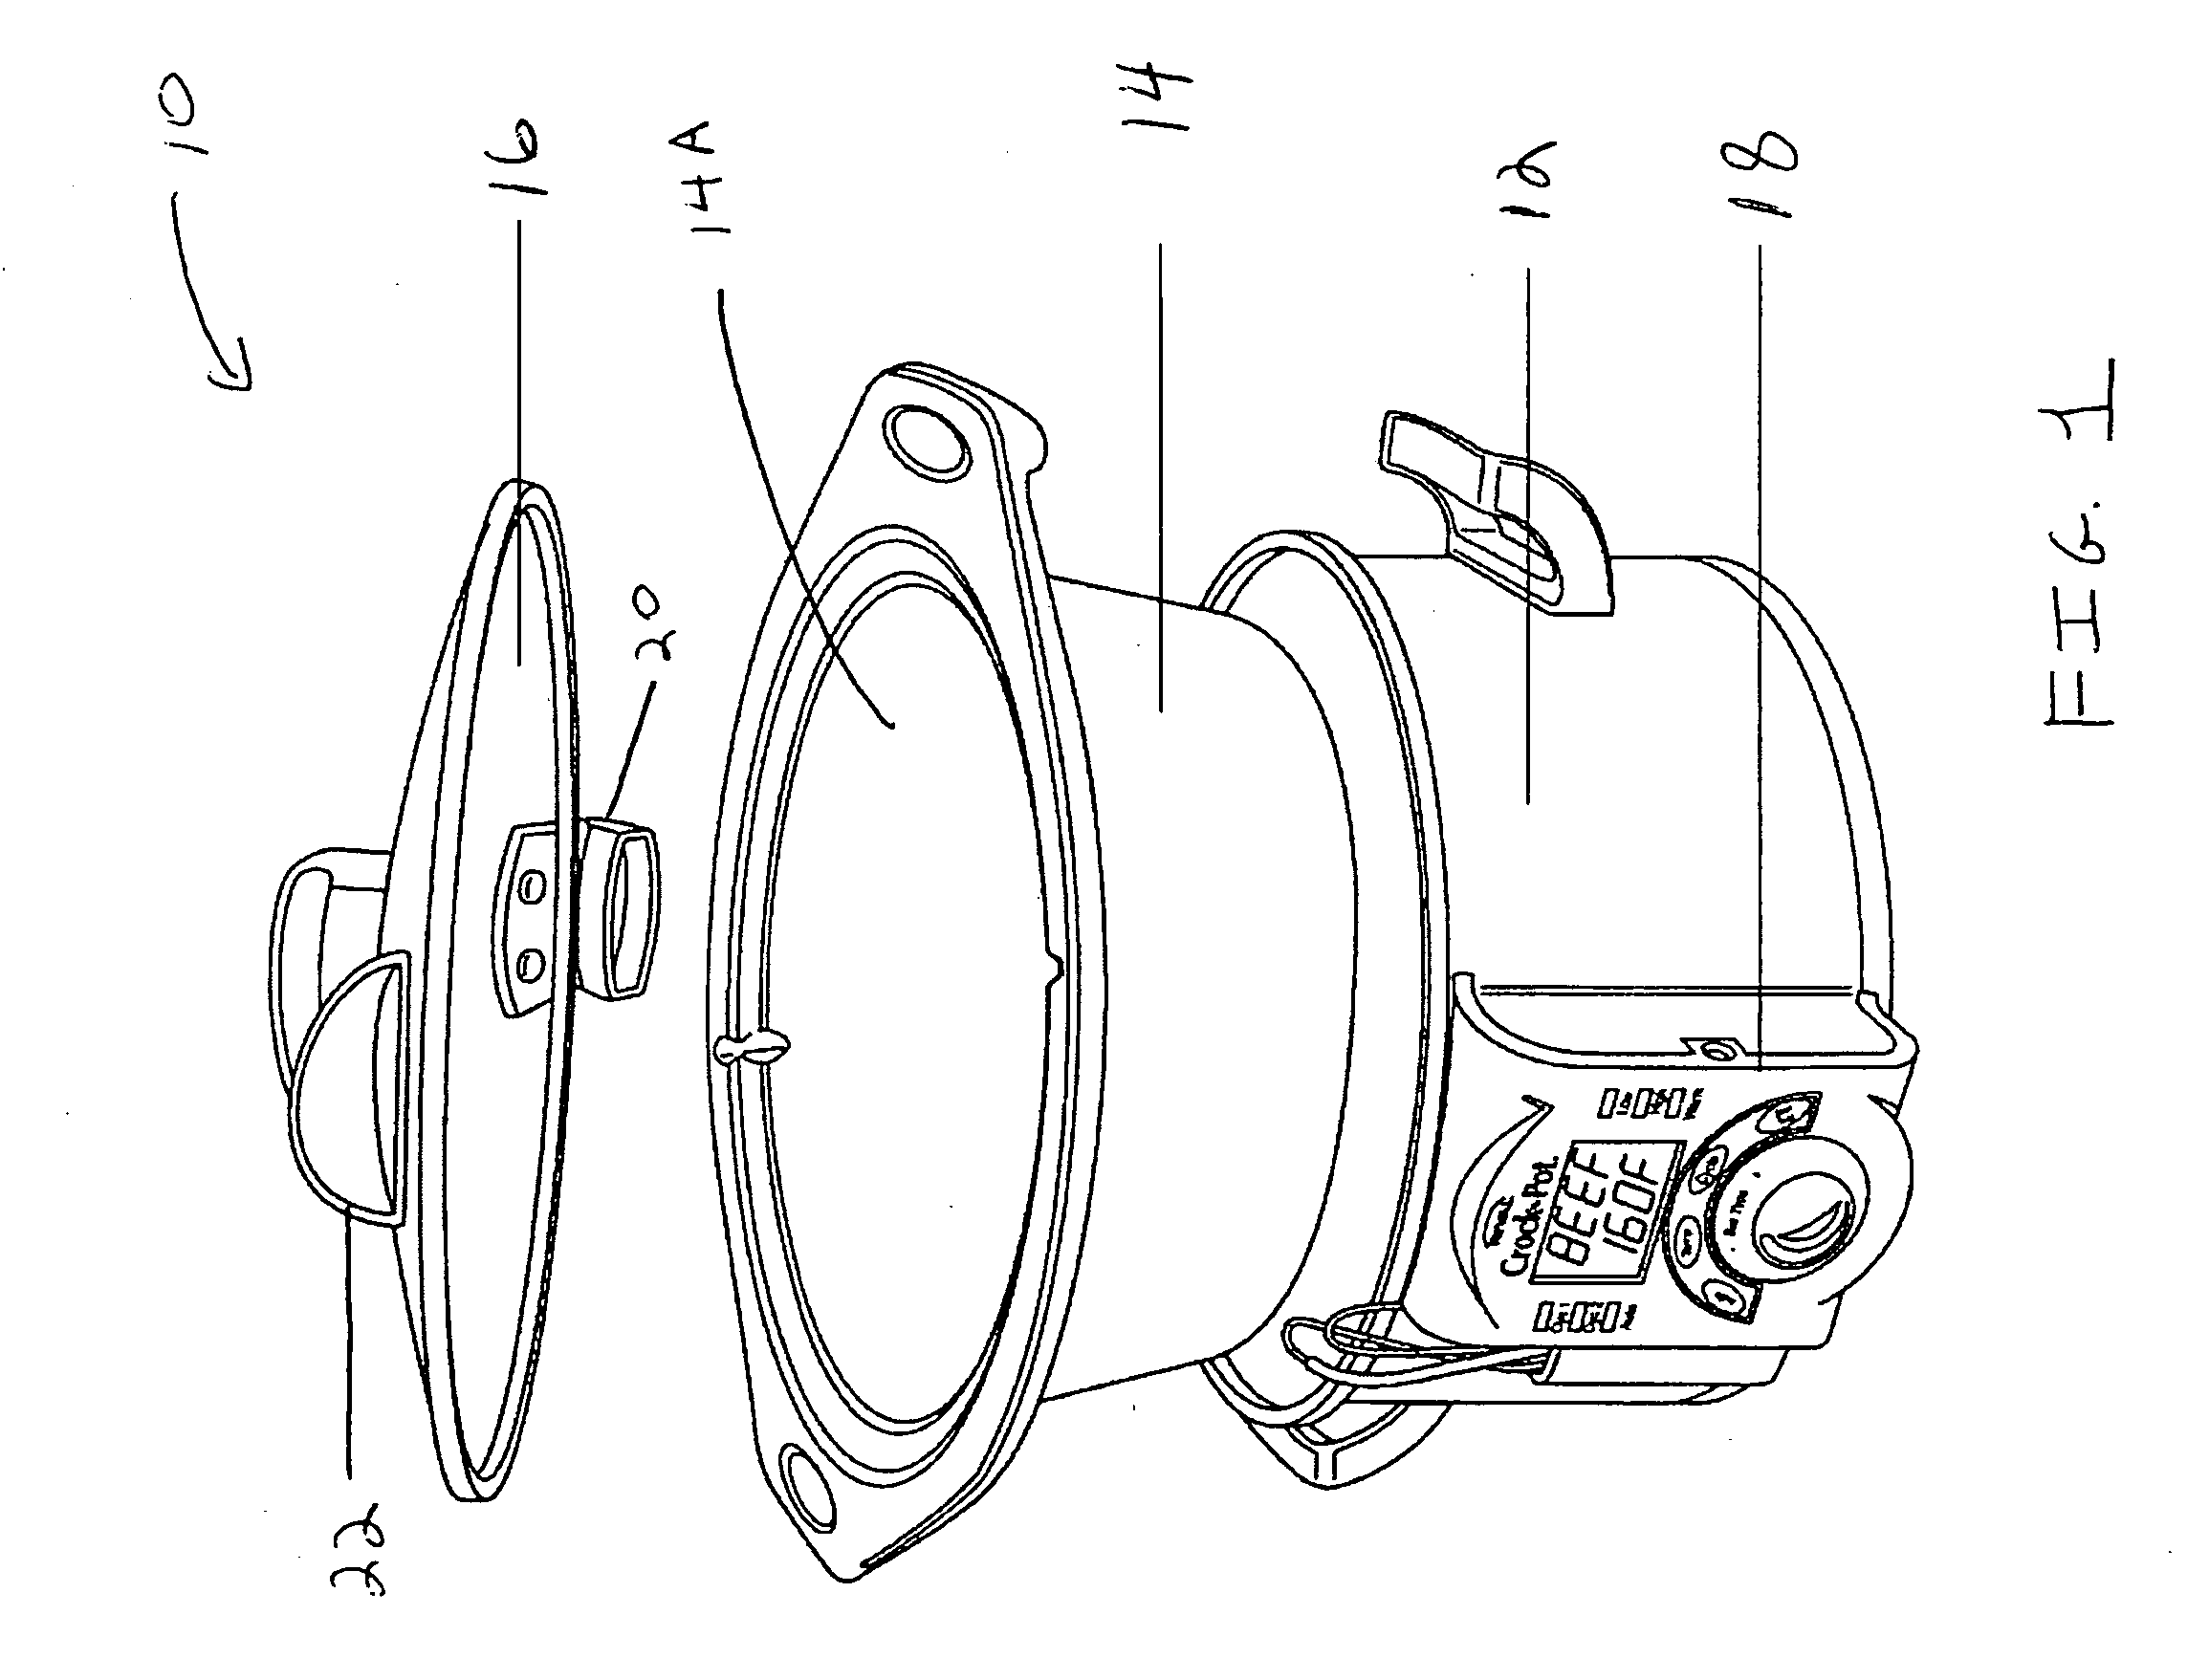 Cooking apparatus with temperature probe and hinged lid